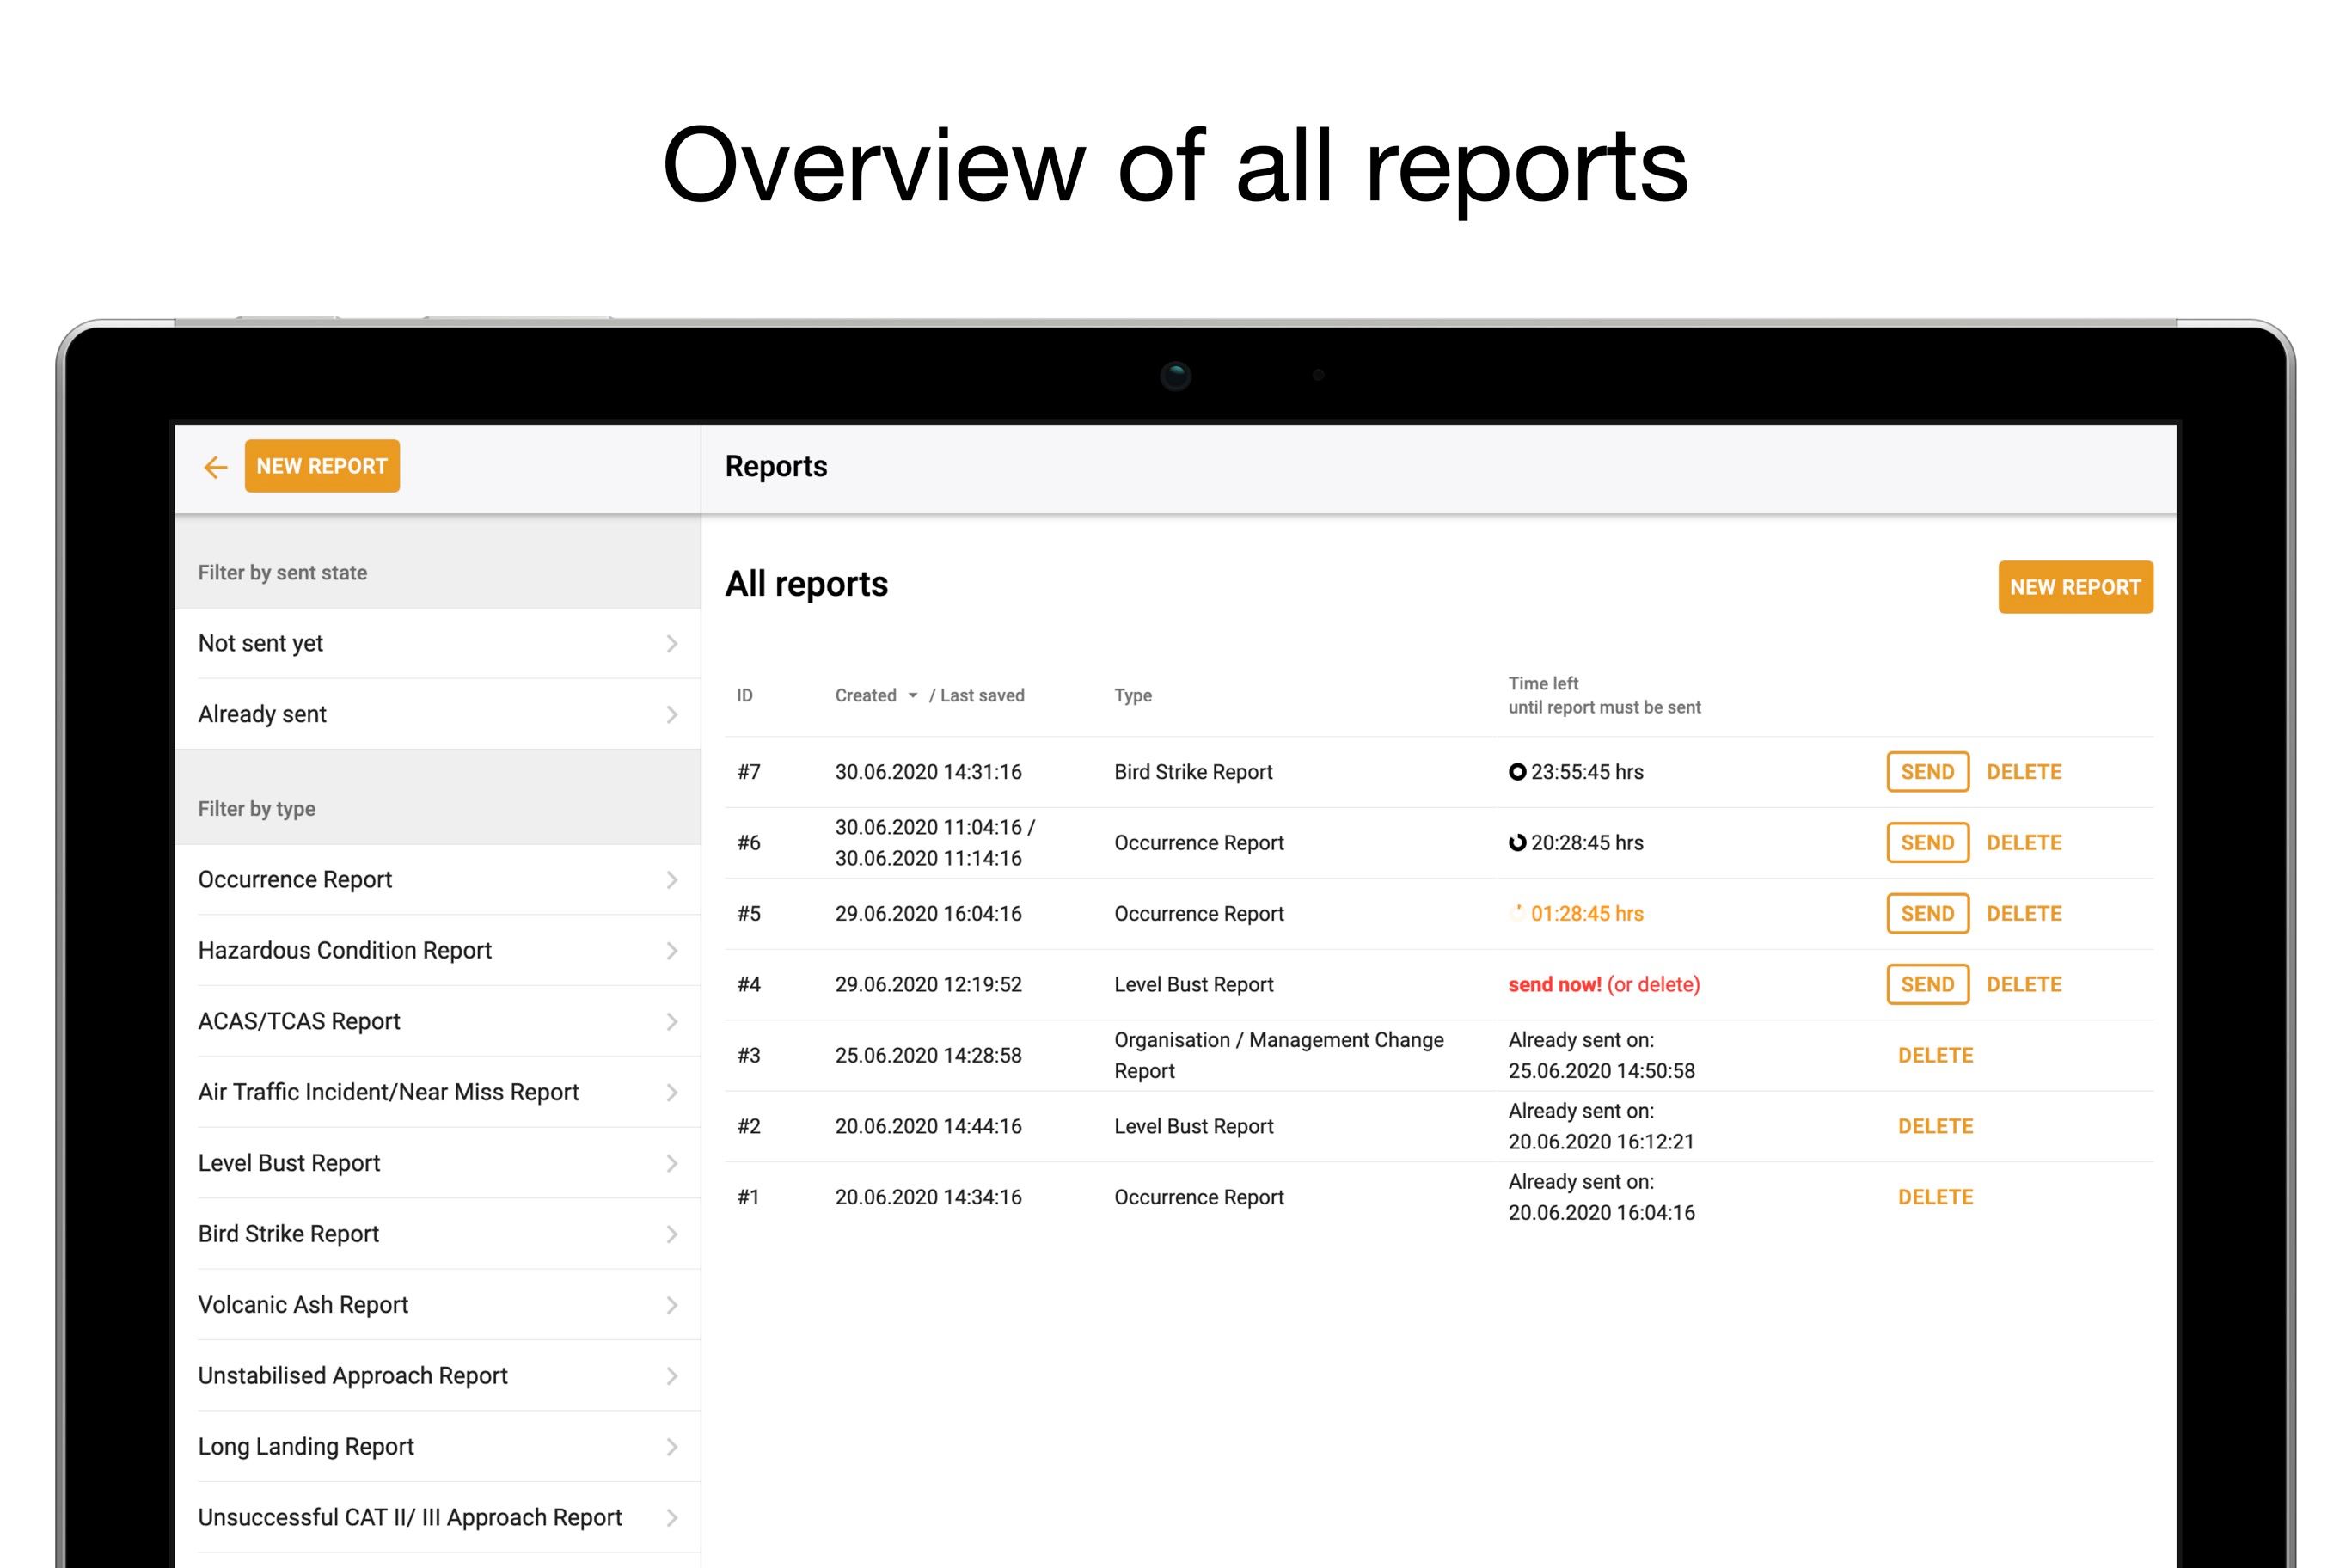 Overview of all reports